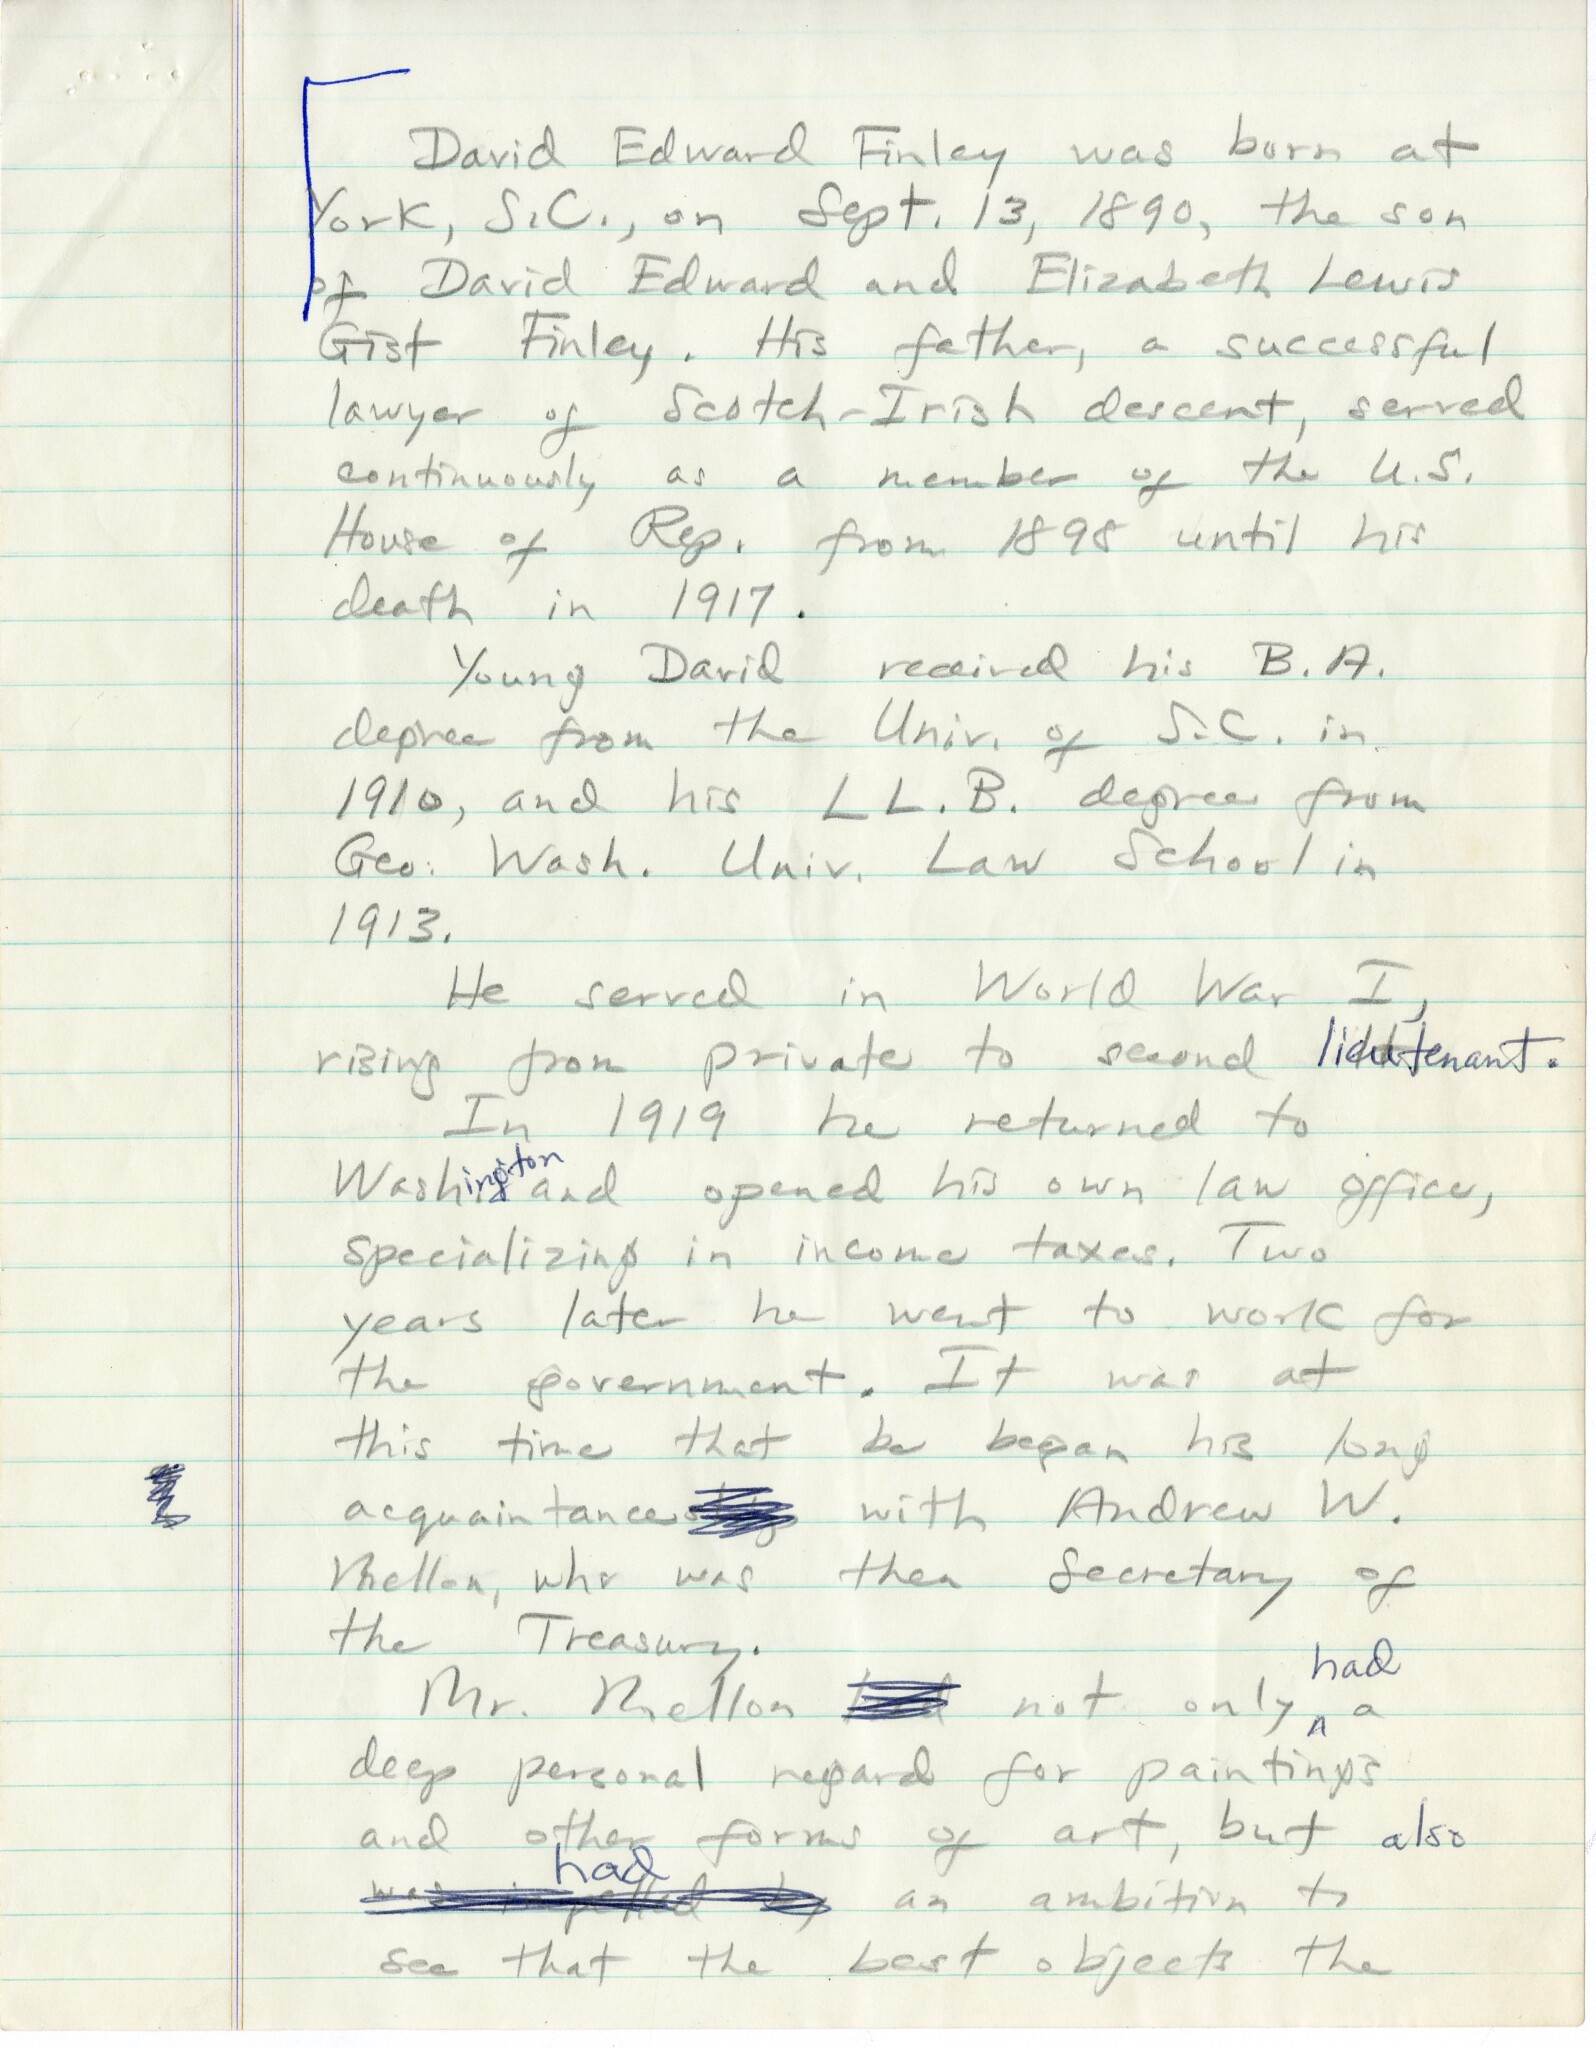 NOTES BY WM. B. WHITE, JR., ON THE LIFE OF DAVID FINLEY OR YORK, S.C. - WU PETTIS ARCHIVES COLLECTION